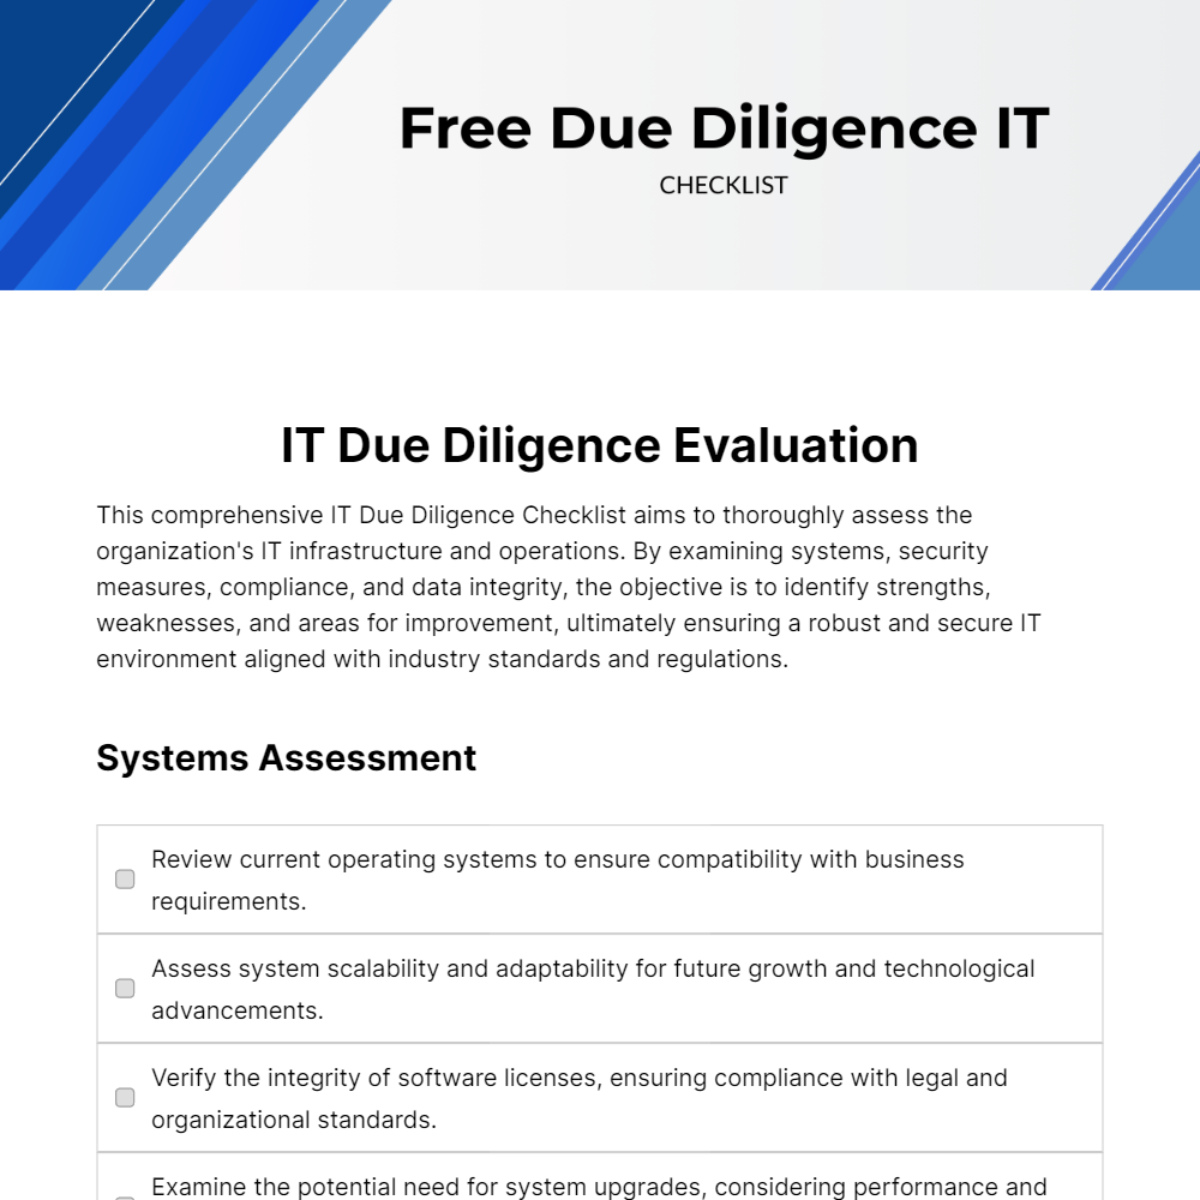 Free Due Diligence IT Checklist Template